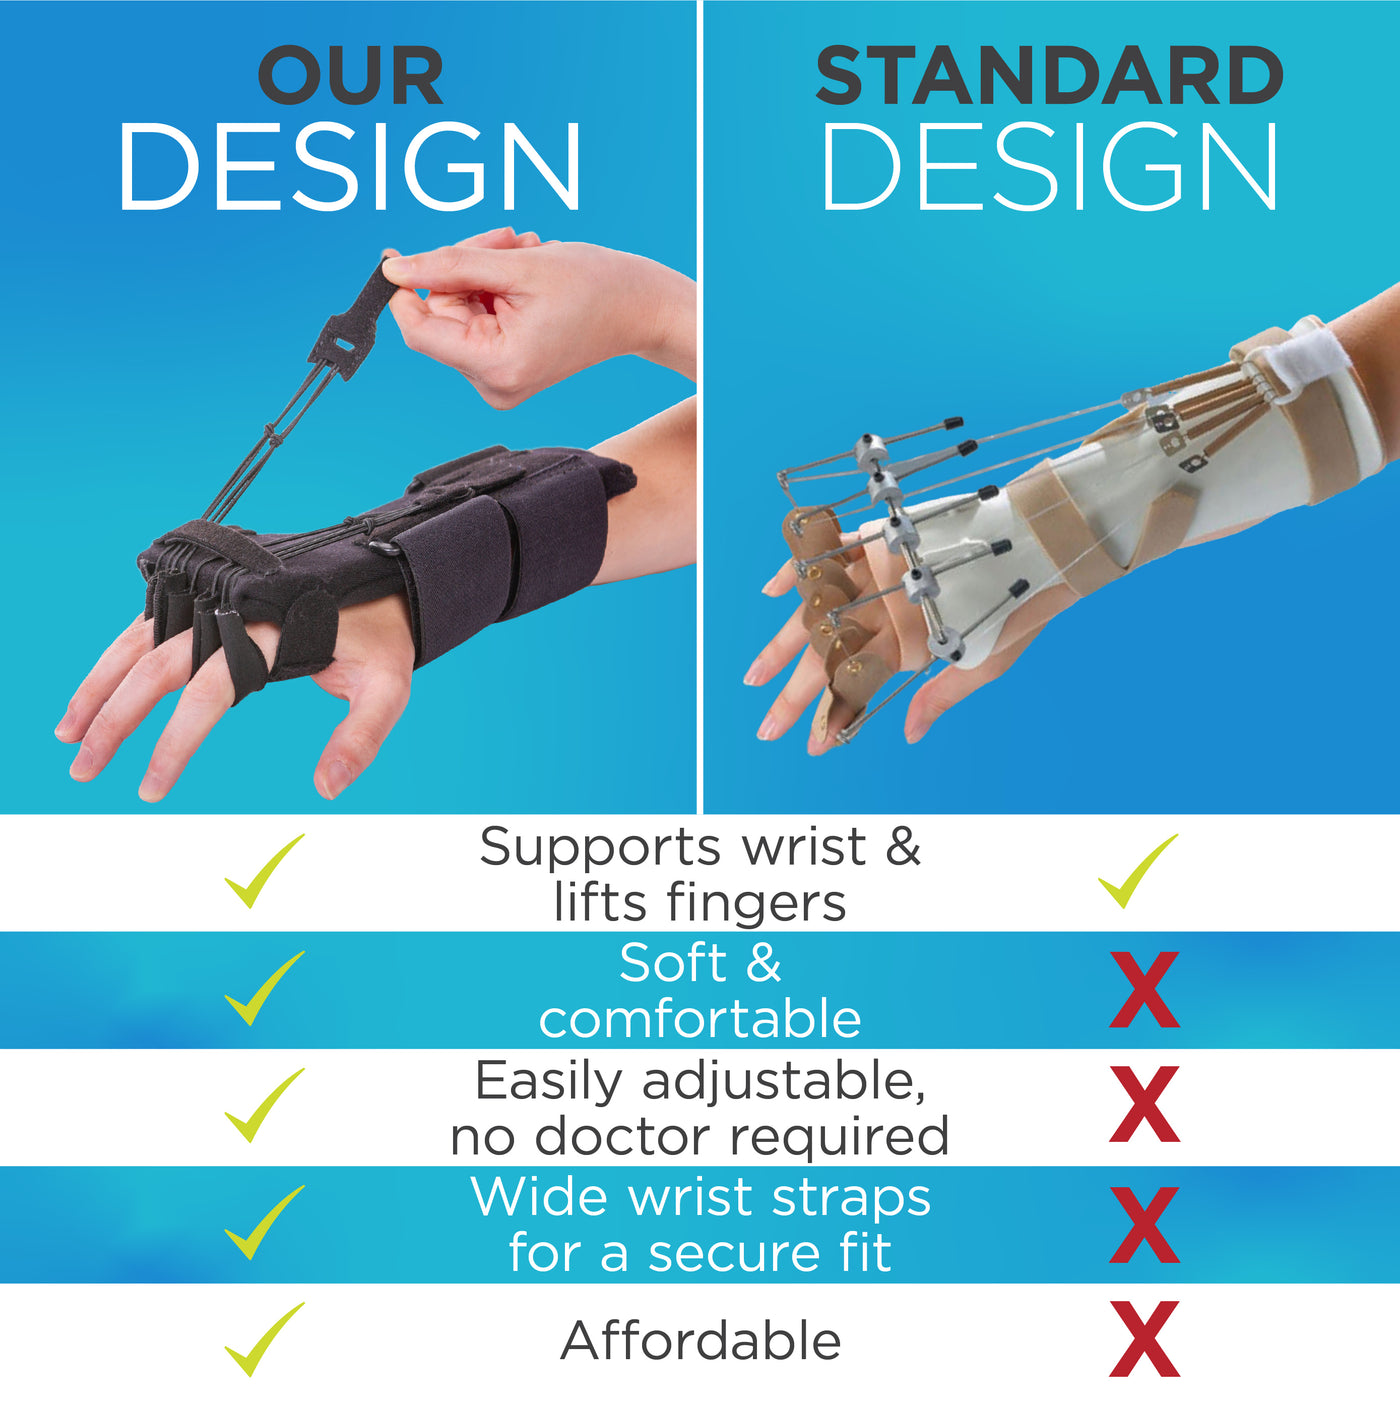 Standard wrist drop braces require a doctor to adjust for you but ours is self adjustable and very affordable